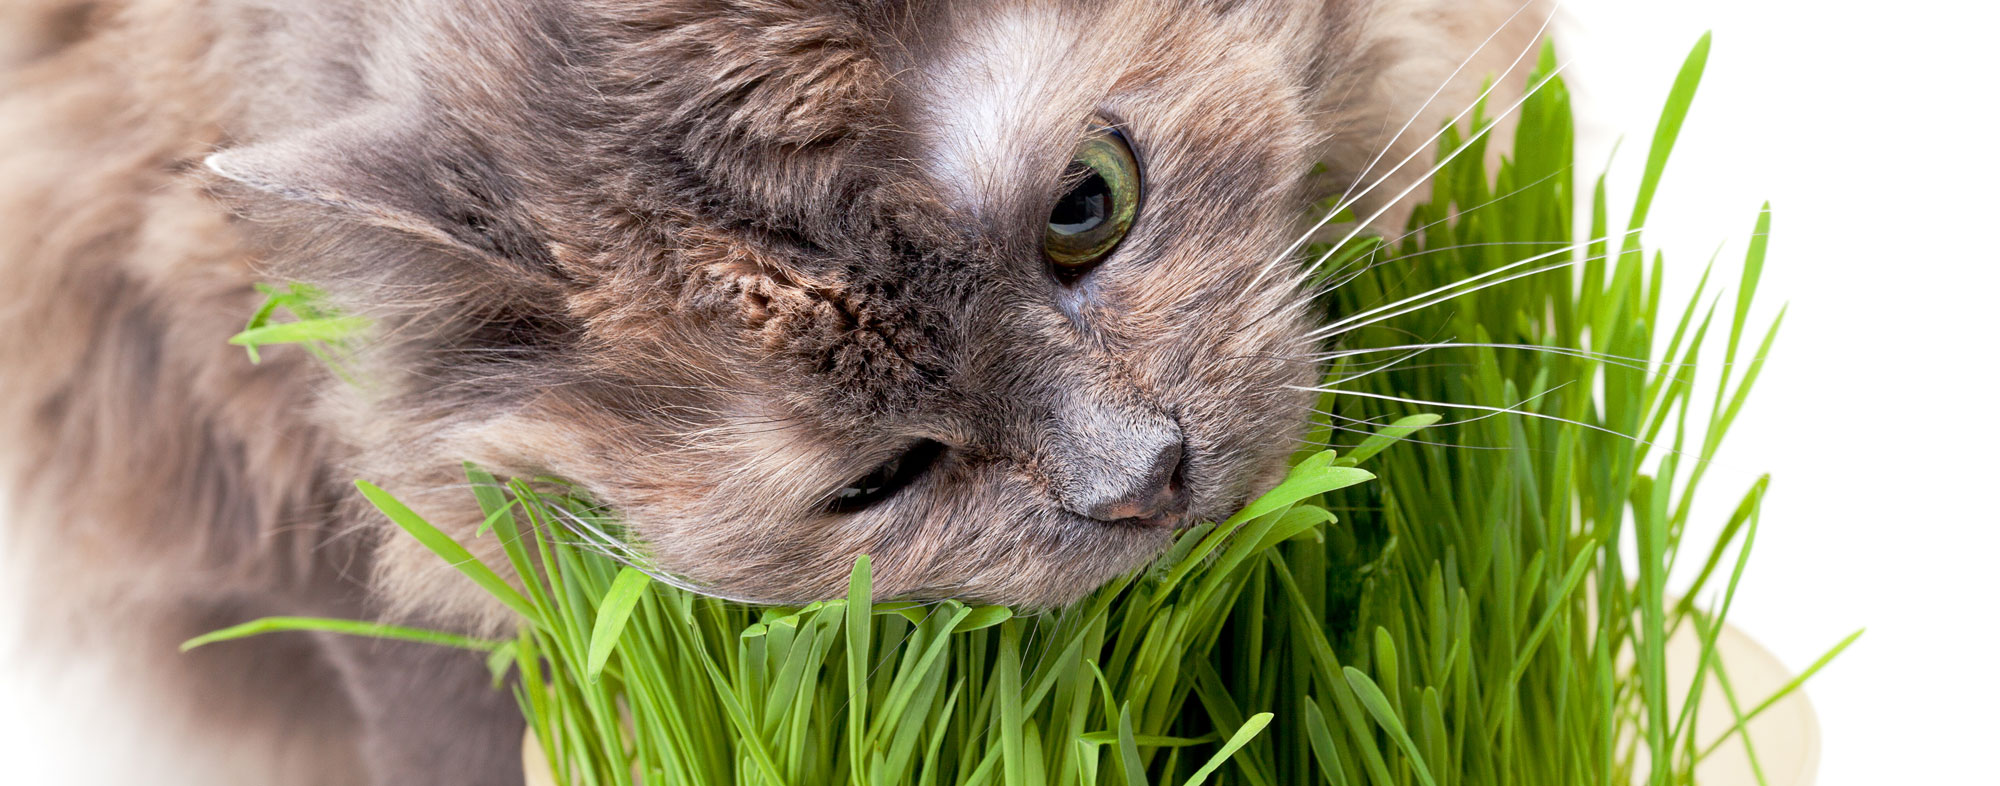 How To Stop Cats From Eating Plants How to Prevent Your Cat from Eating House Plants | Hartz